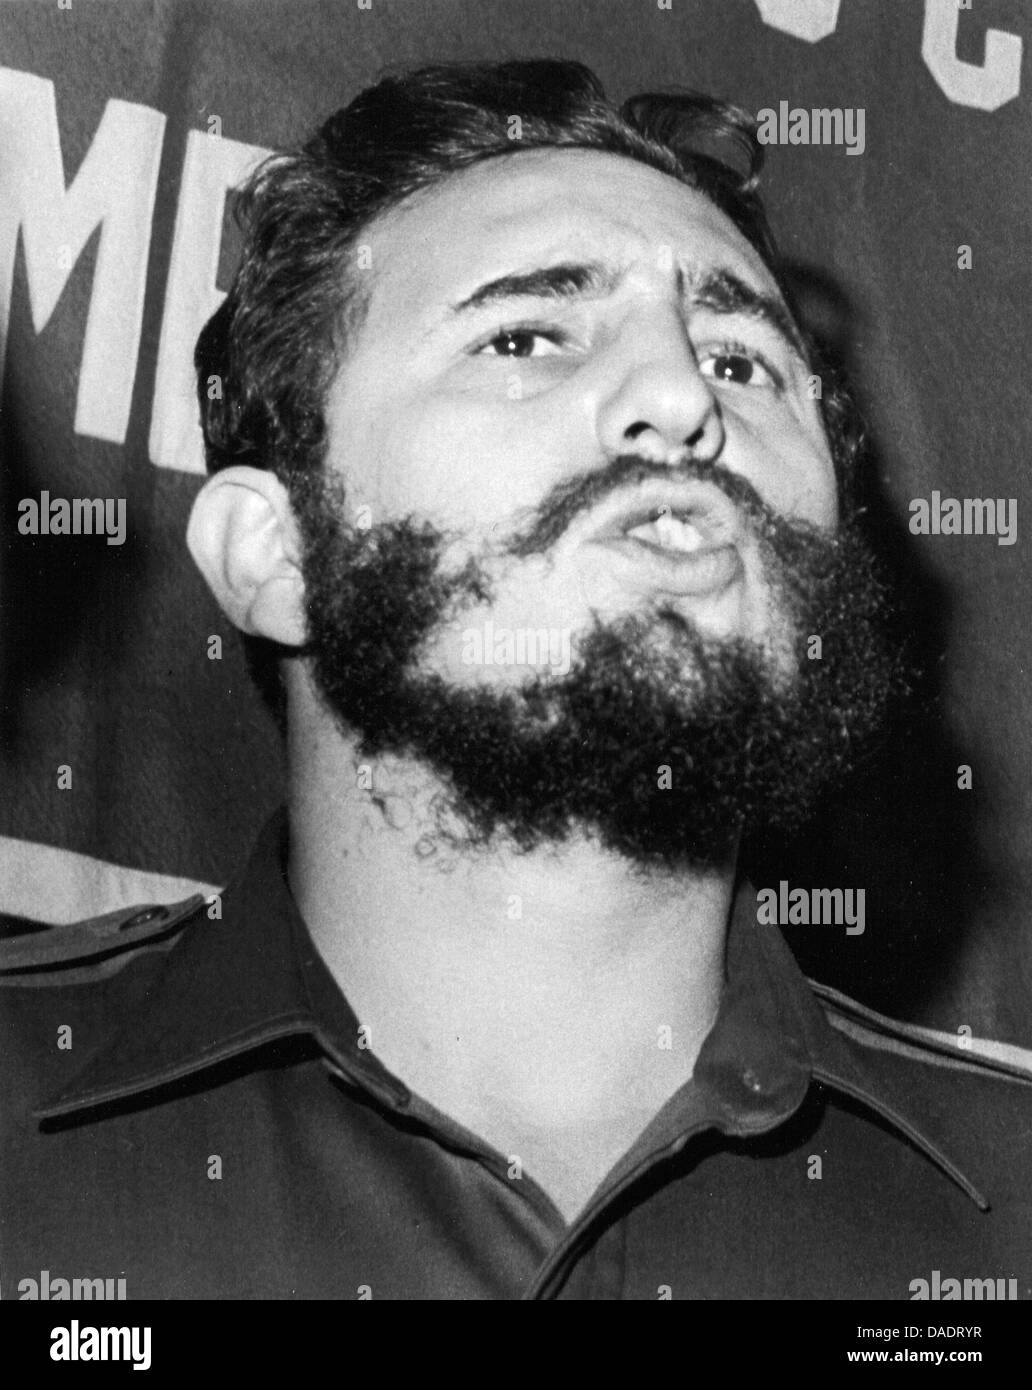 Fidel Castro in 1961. Portrait by photographer Fred Stein (1909-1967) who emigrated 1933 from Nazi Germany to France and finally to the USA. Stock Photo